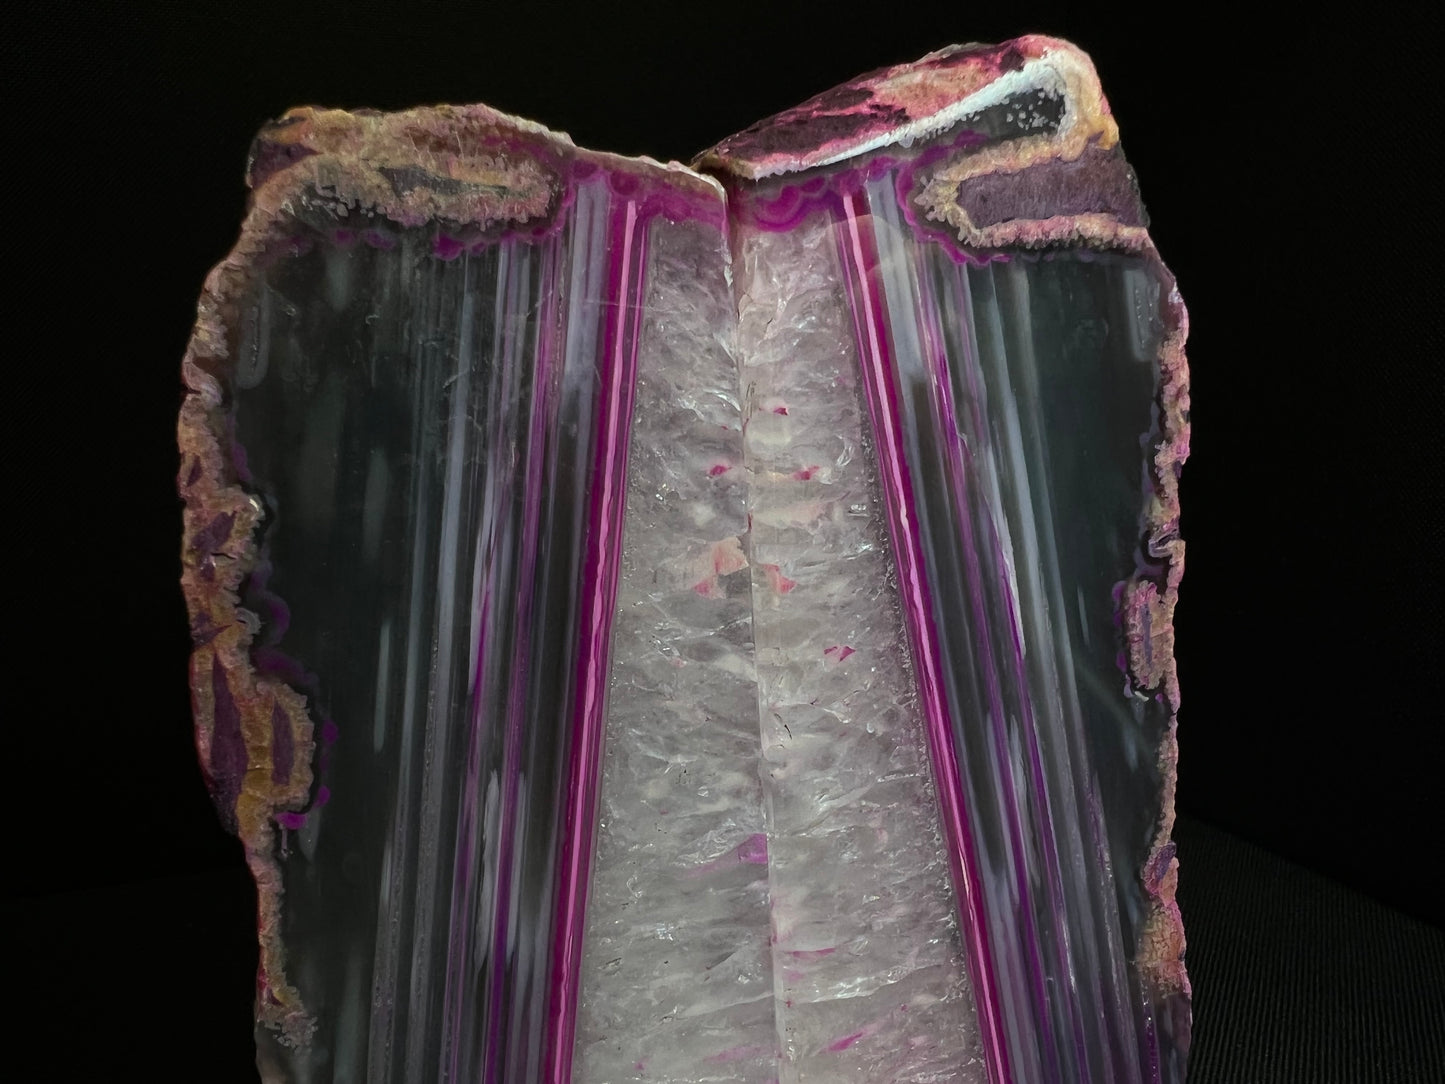 A Pair of Polished Pink Agate Bookends- Statement Piece, Home Décor